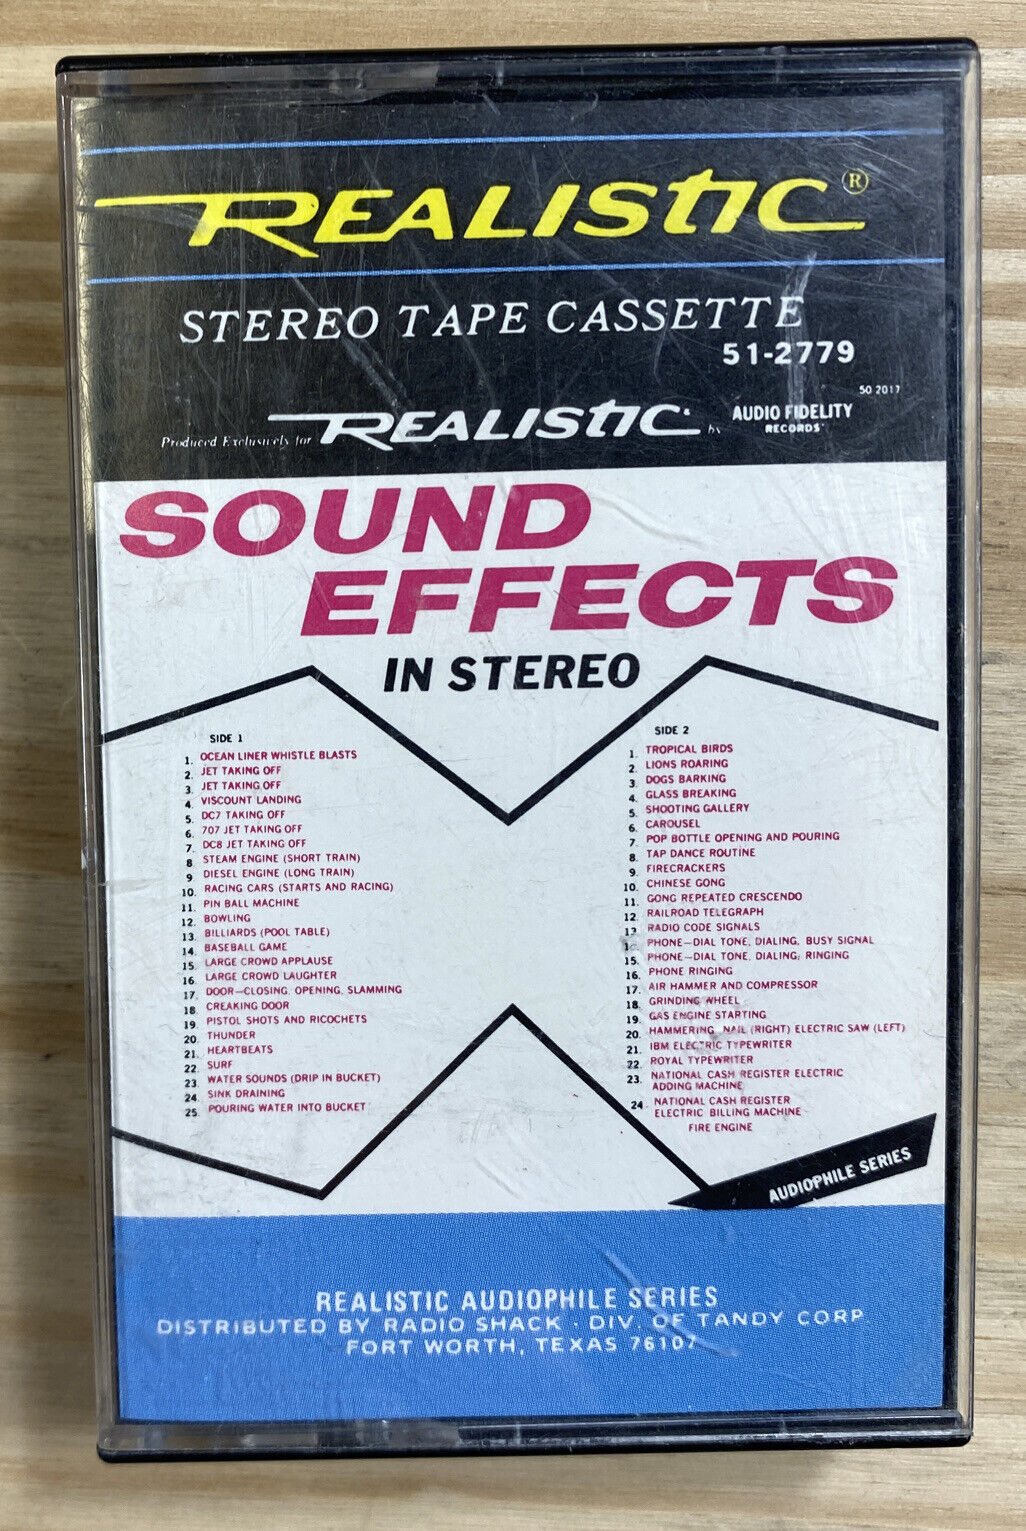 Realistic High Quality Sound Effects Cassette In Stereo Audiophile Series Tested